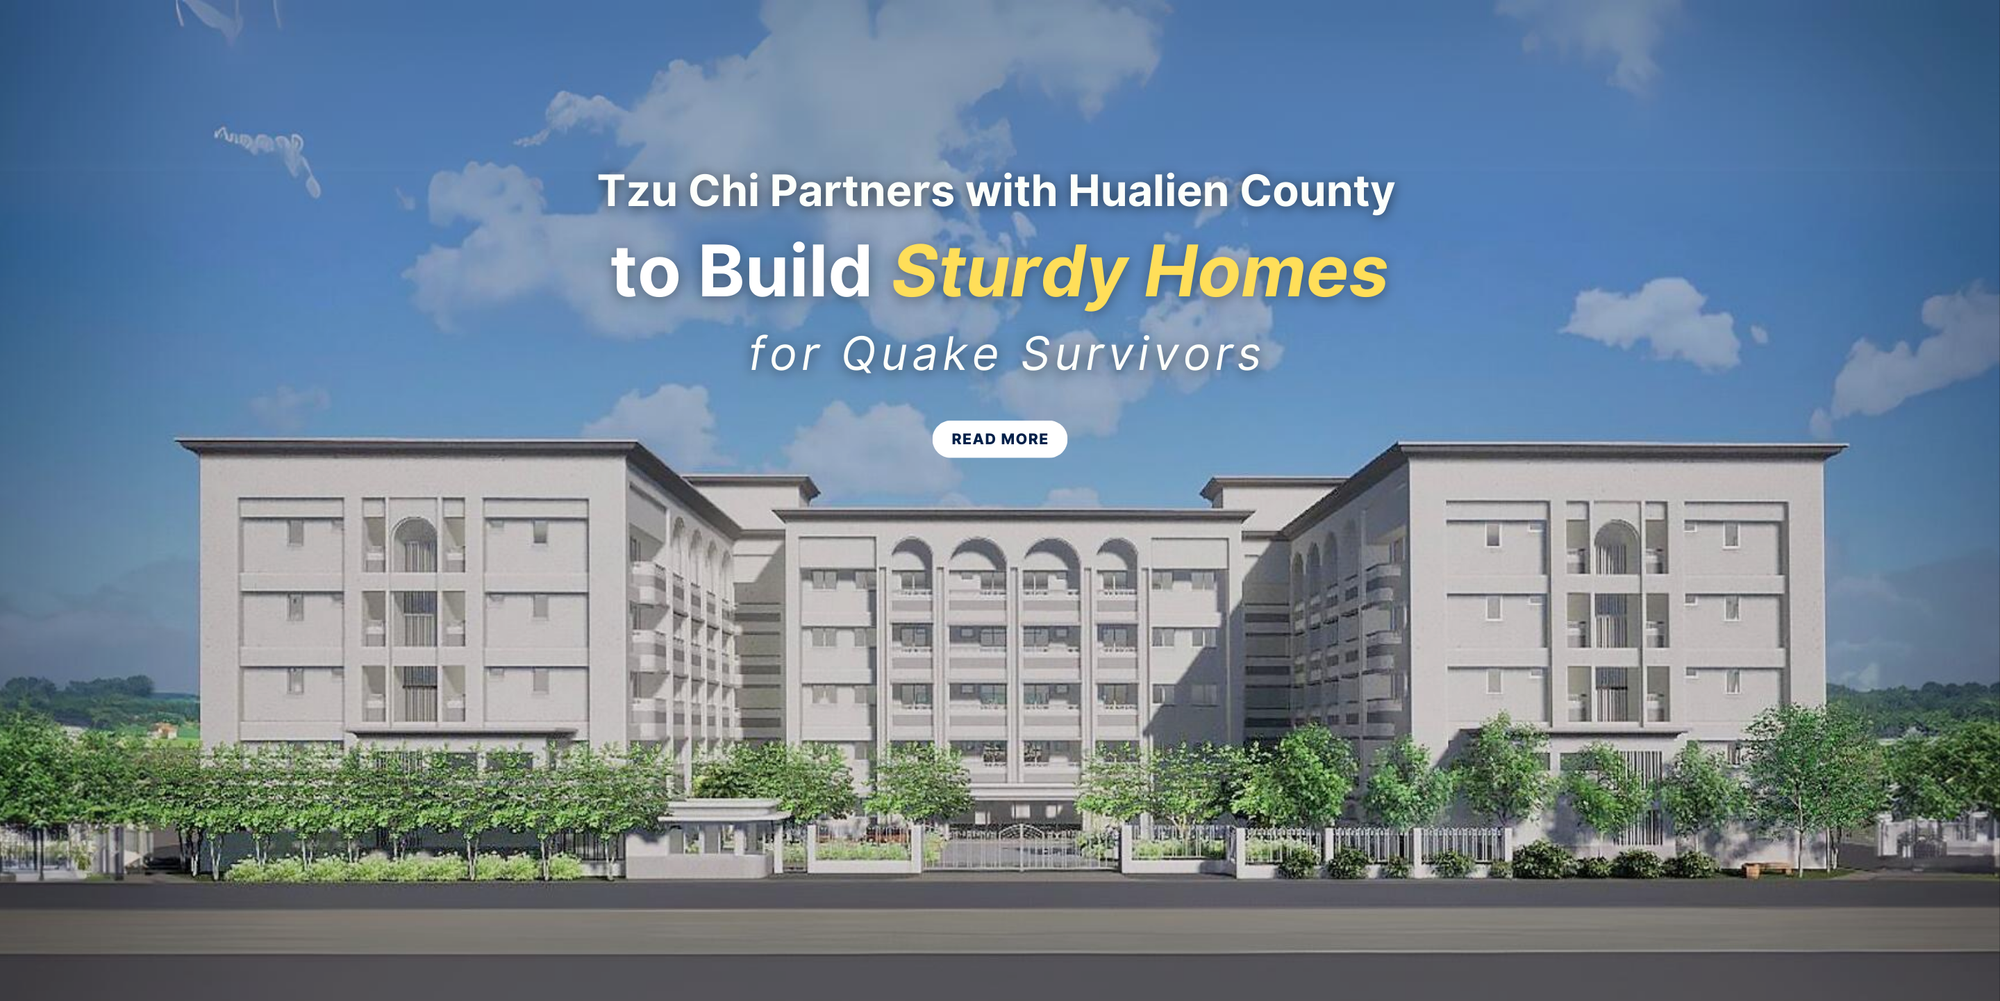 Tzu Chi Partners with Hualien County to Build Sturdy Homes for Quake Survivors